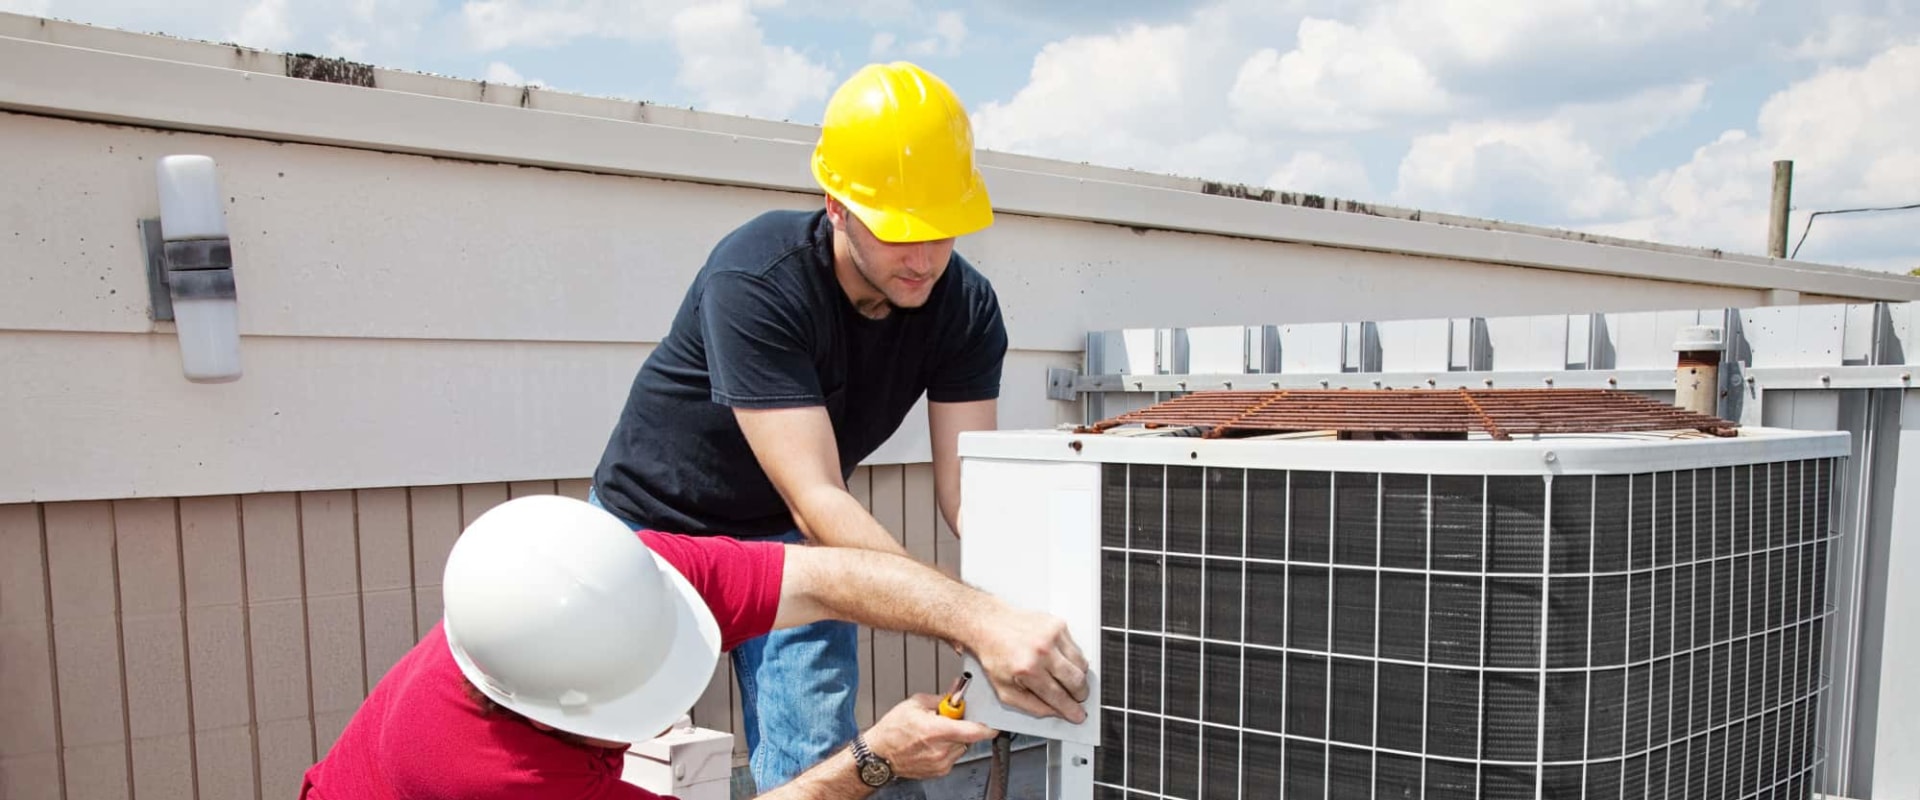 Trusted HVAC Air Conditioning Repair Services In Oakland Park FL